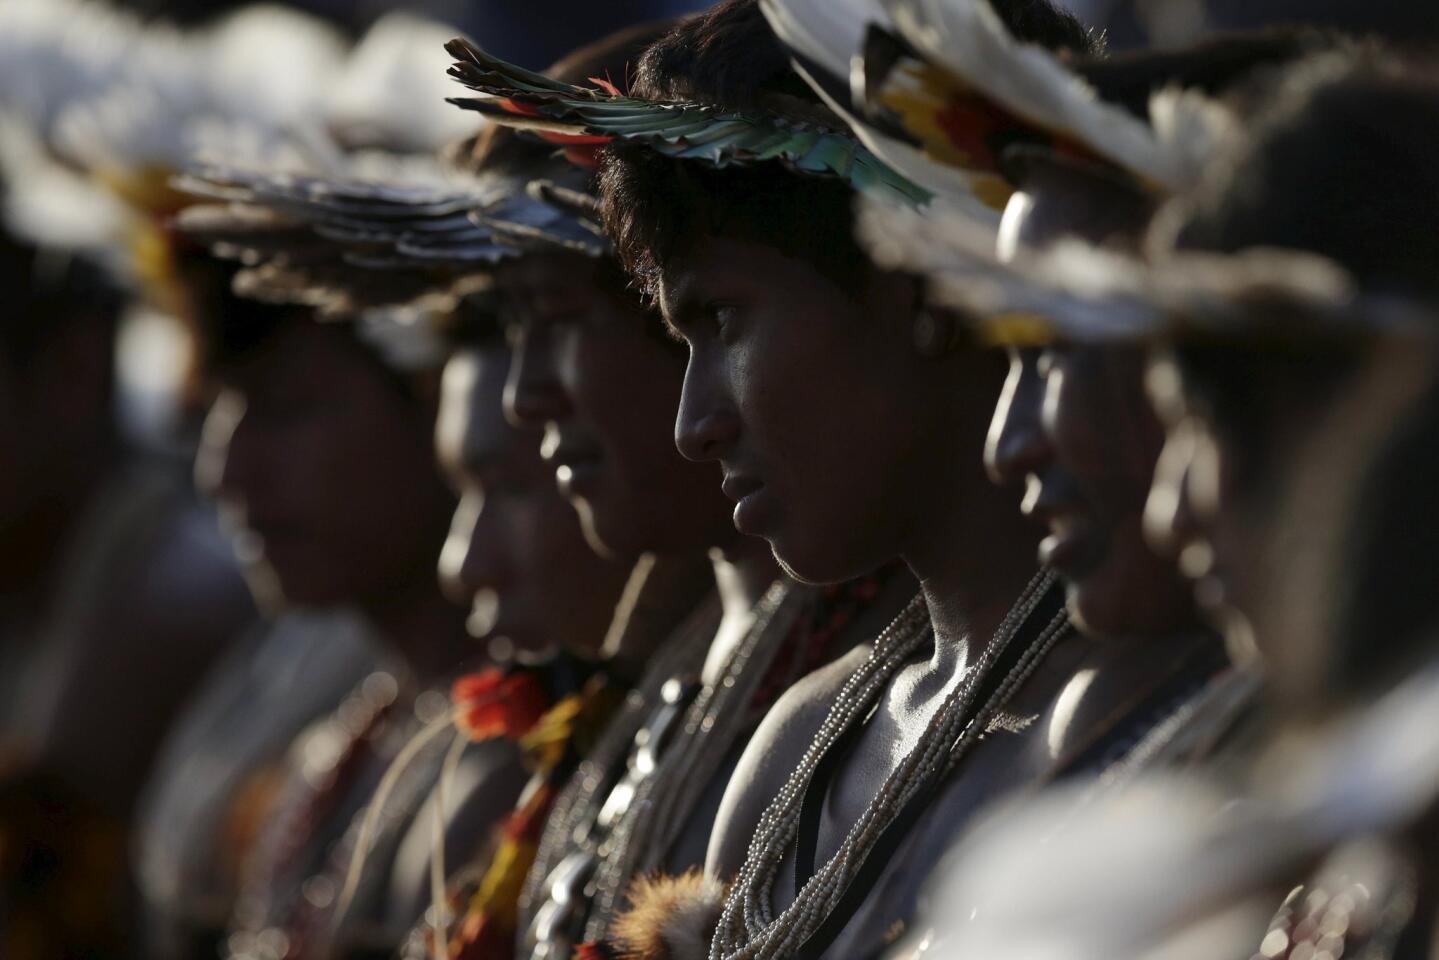 Indigenous men from the Erikbaktsa tribe watch the bow-and-arrow competition at the first World Games for Indigenous Peoples in Palmas